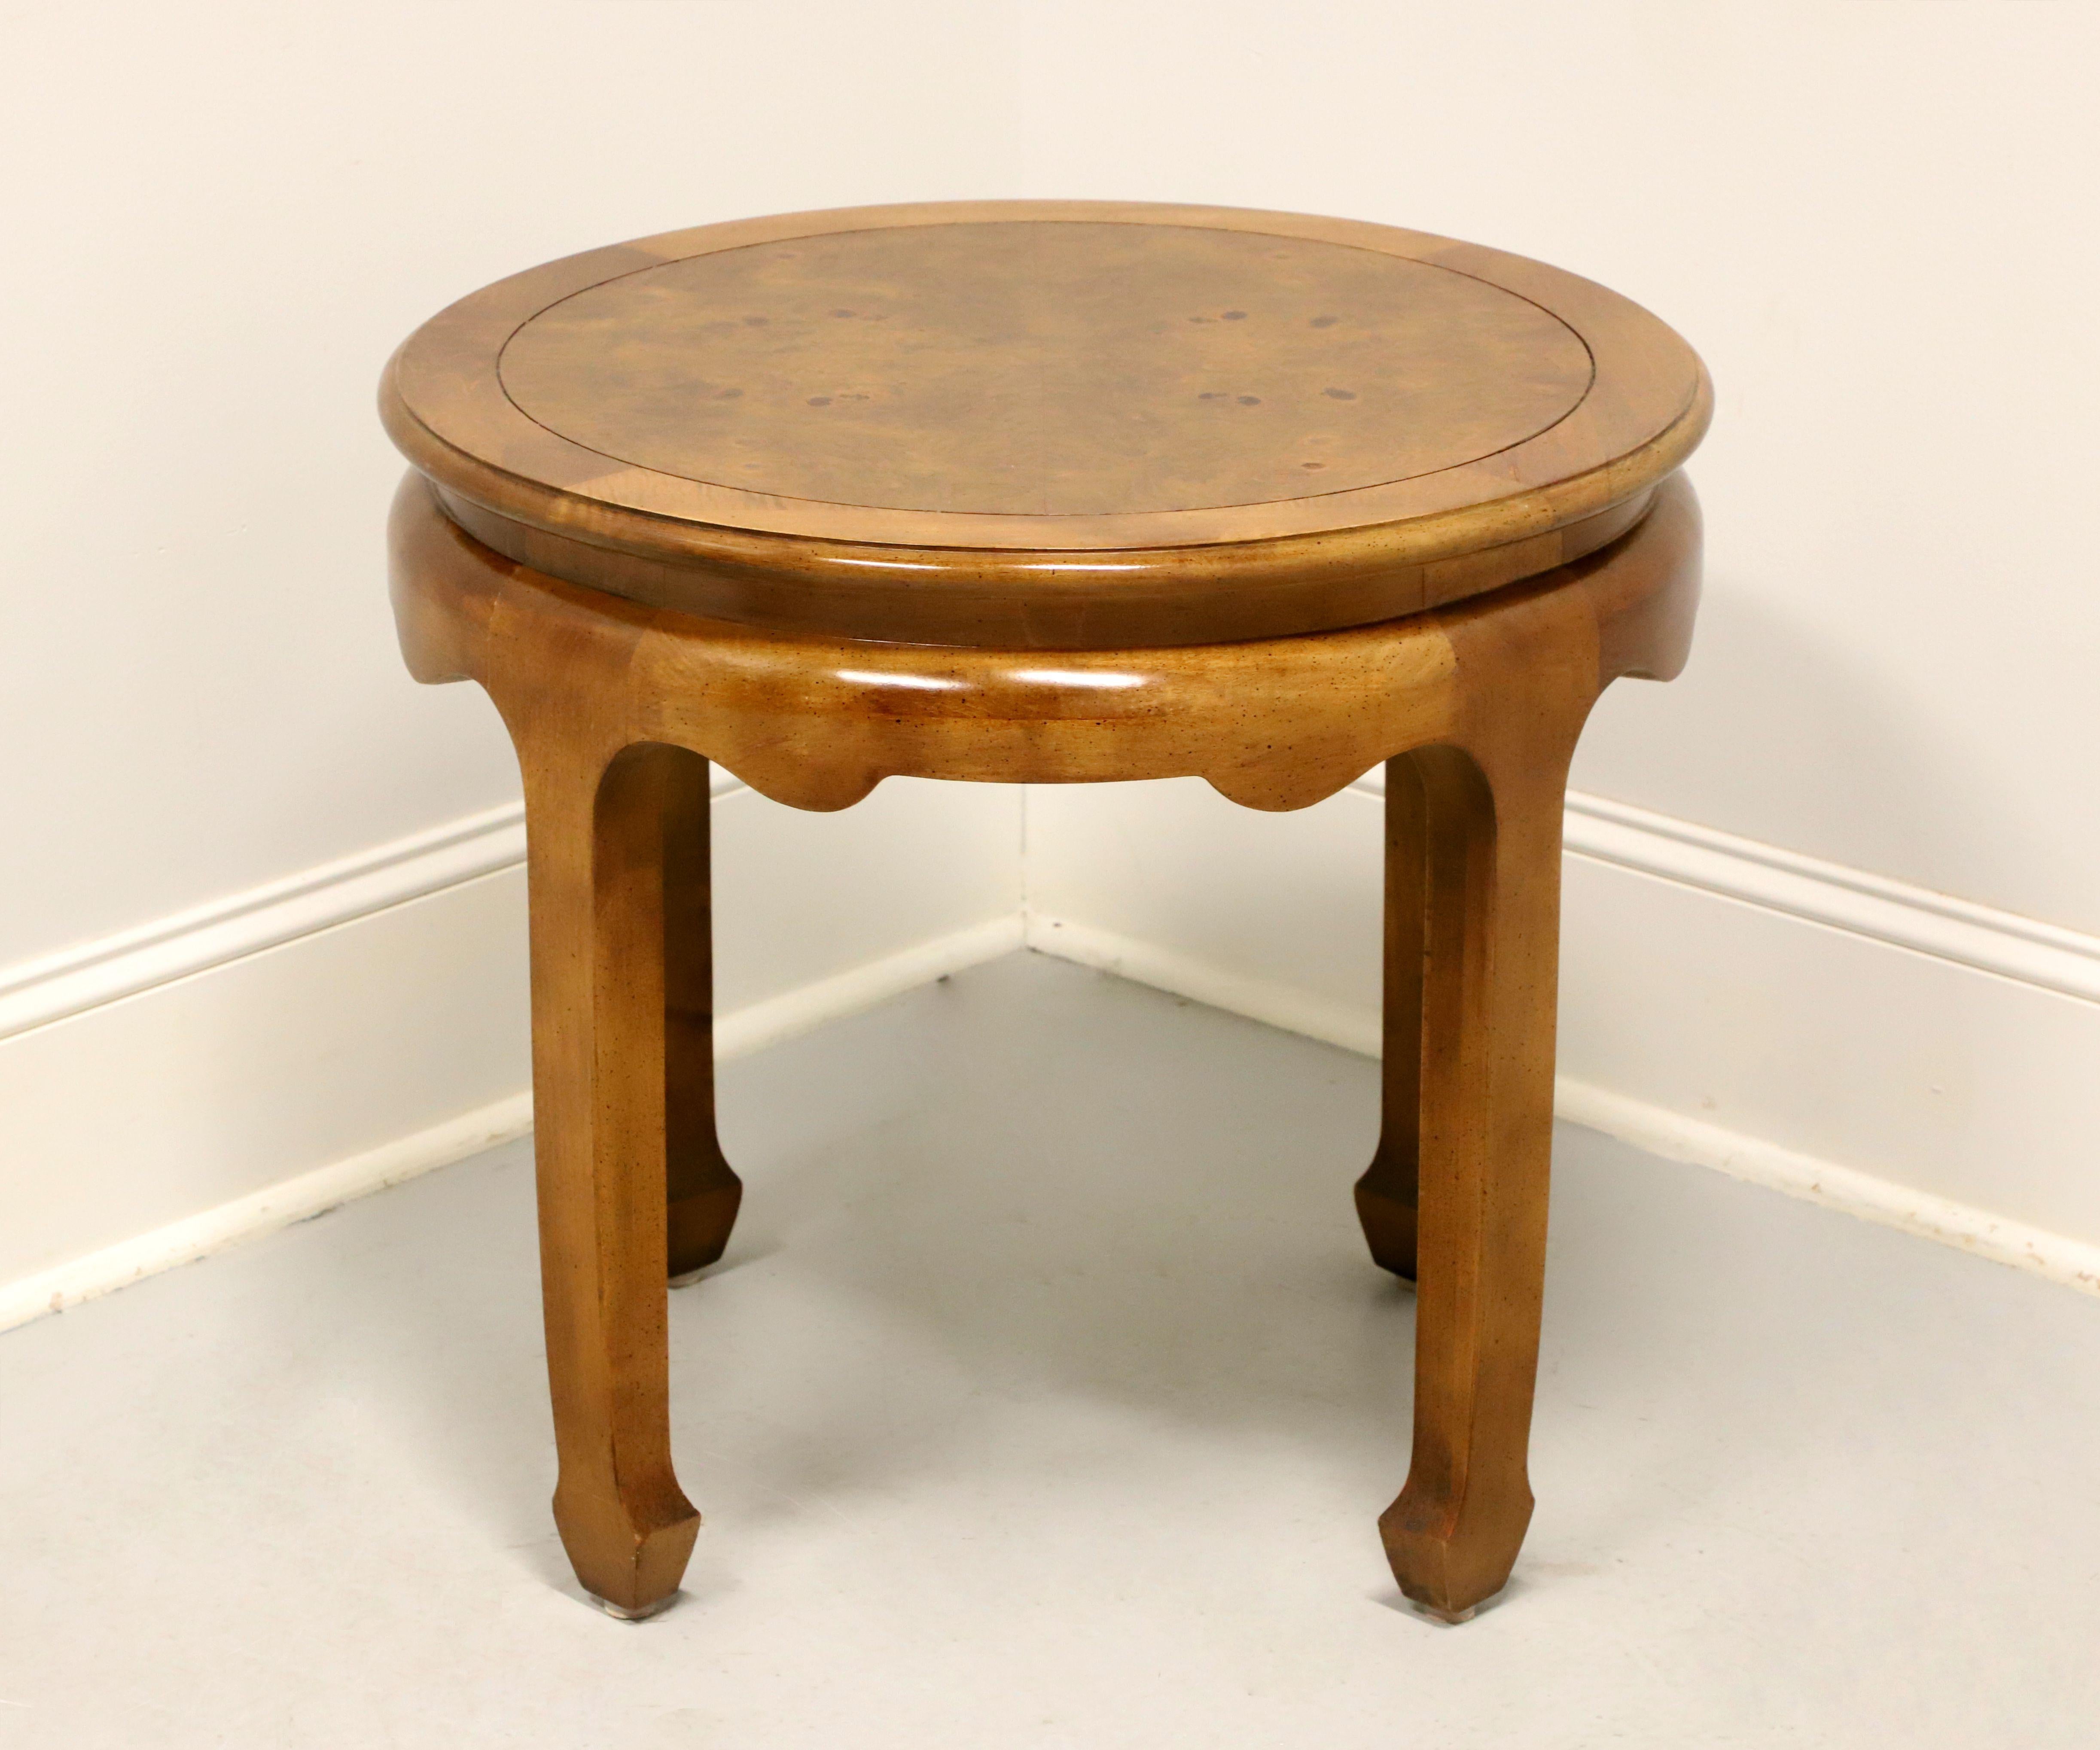 An Asian style round side table by high-quality furniture maker Century, from their Chin Hua